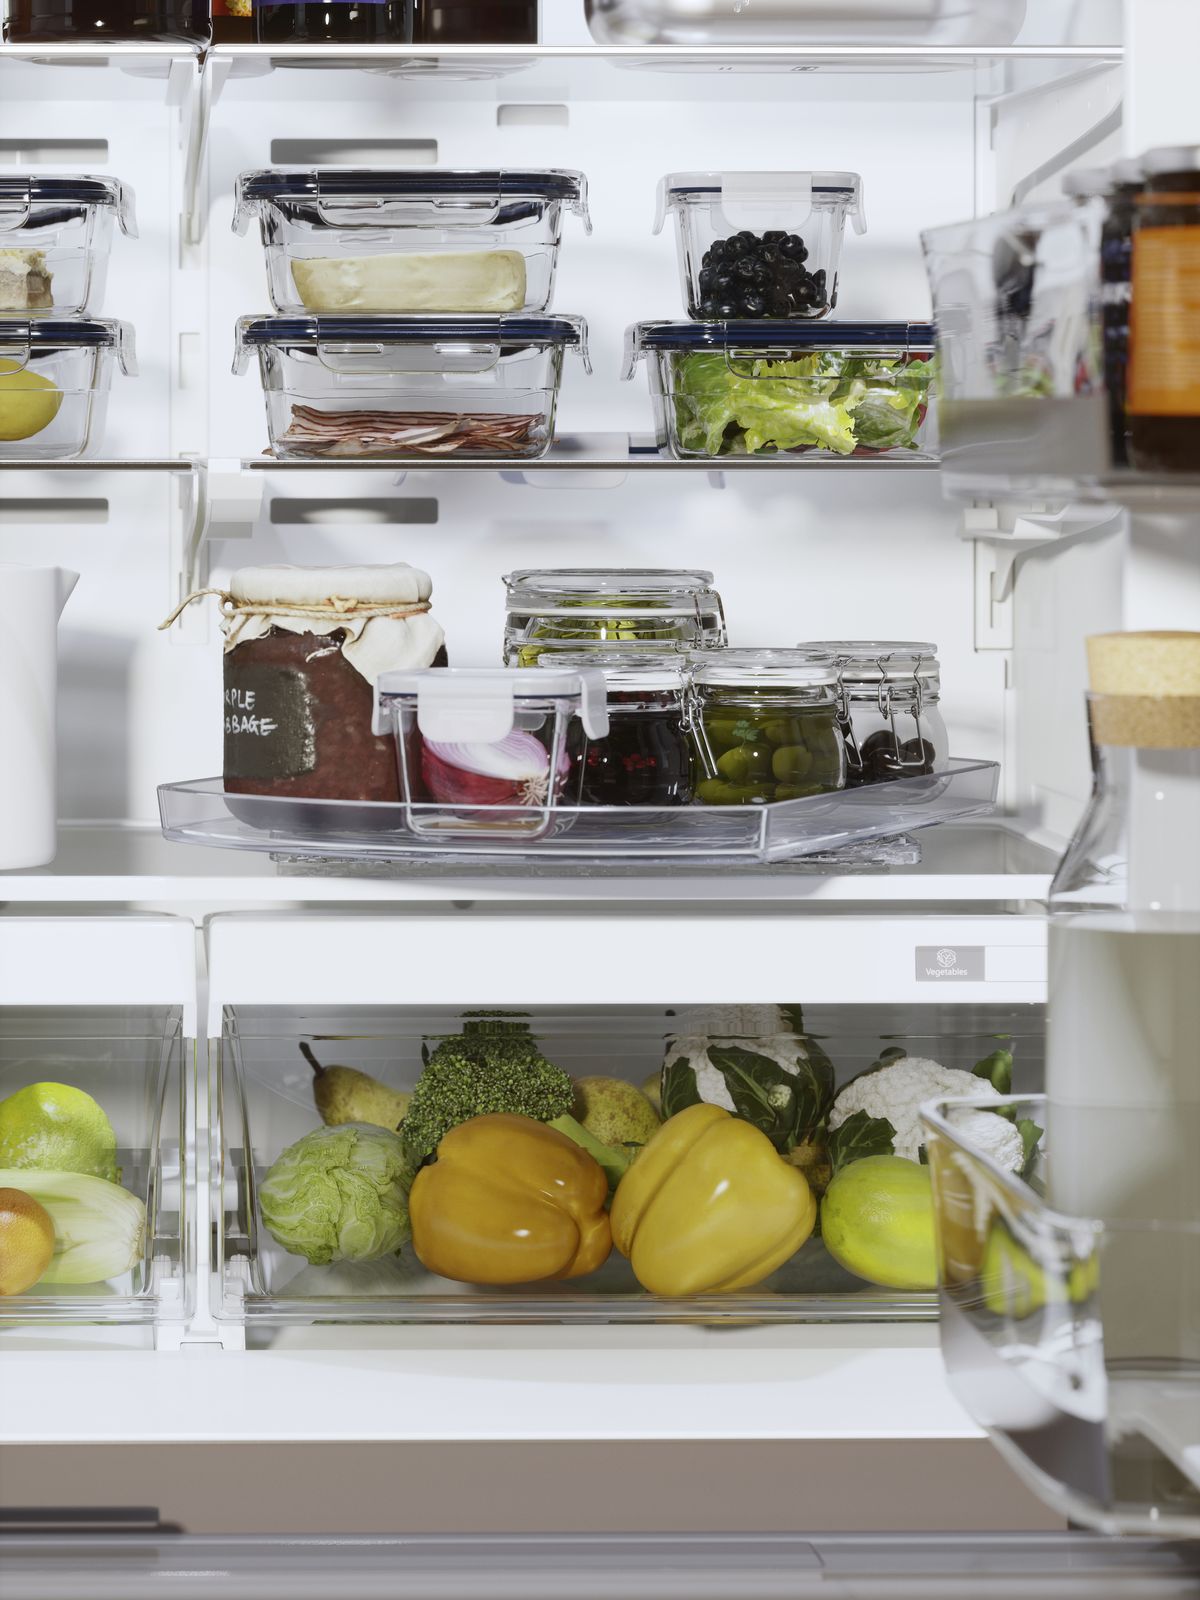 This viral IKEA fridge organizer is my latest kitchen must-have – it might be the best $35 you ever spend